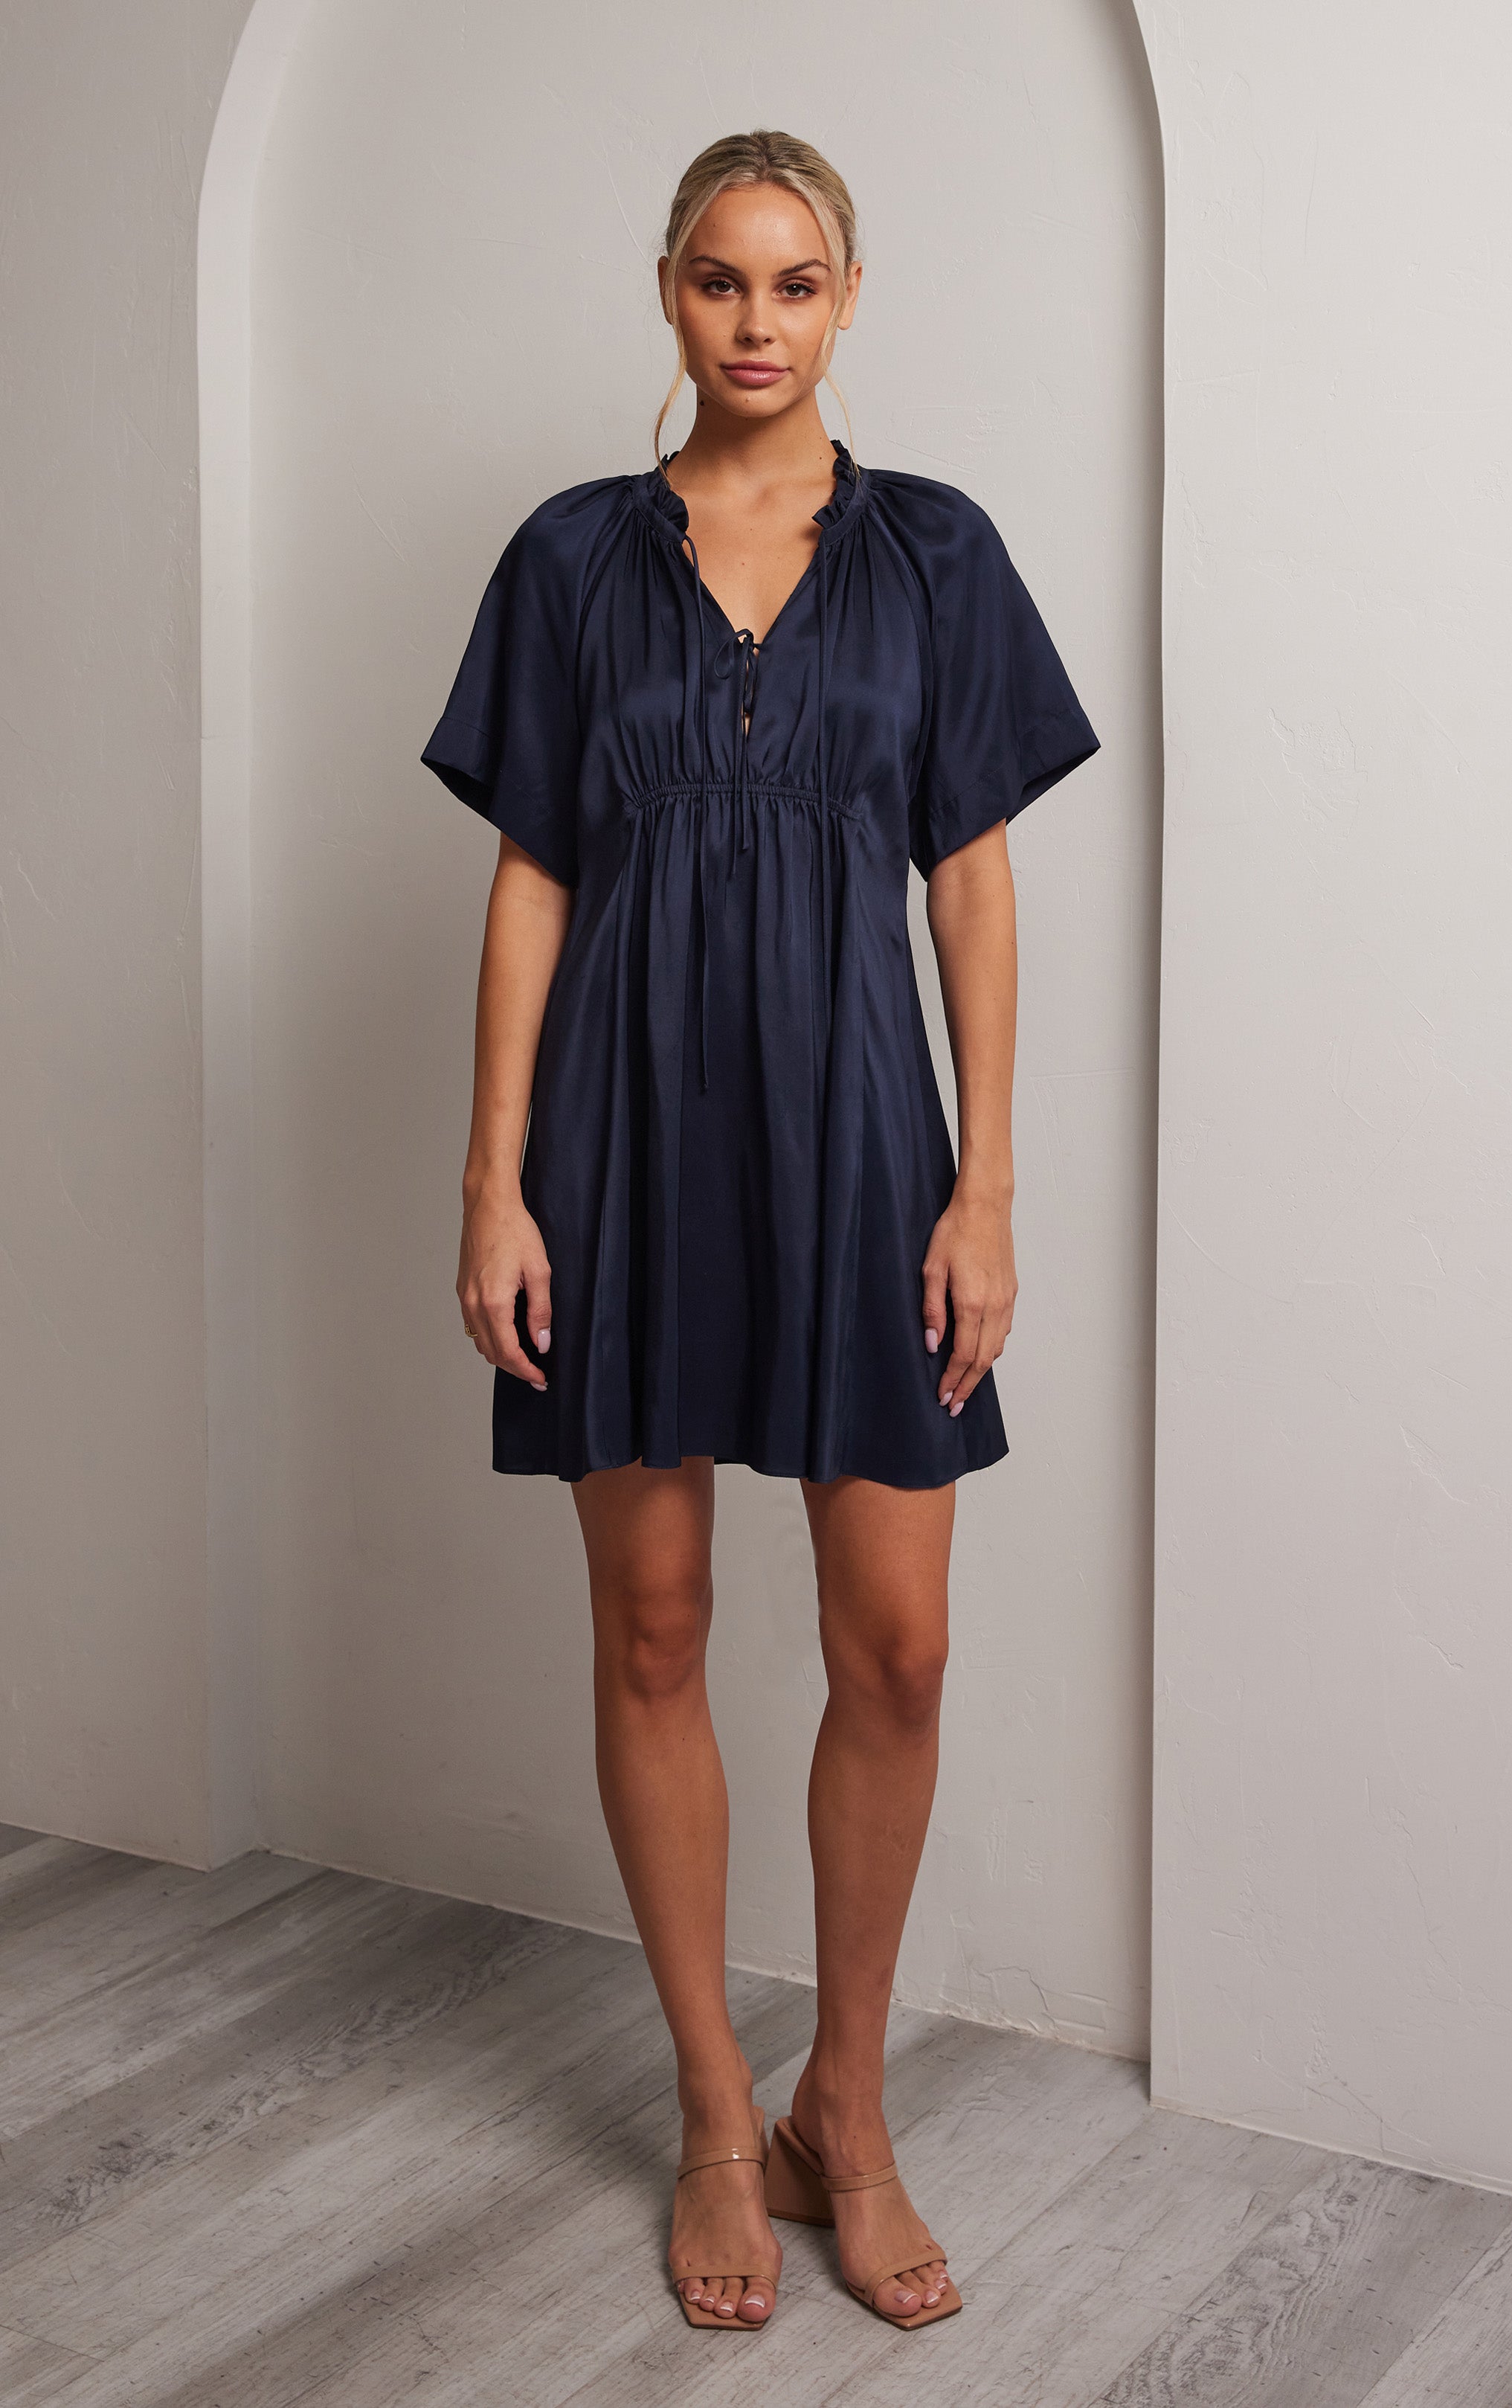 woman standing front view of navy short sleeved silk dress with ruffled neck and silhouette cut